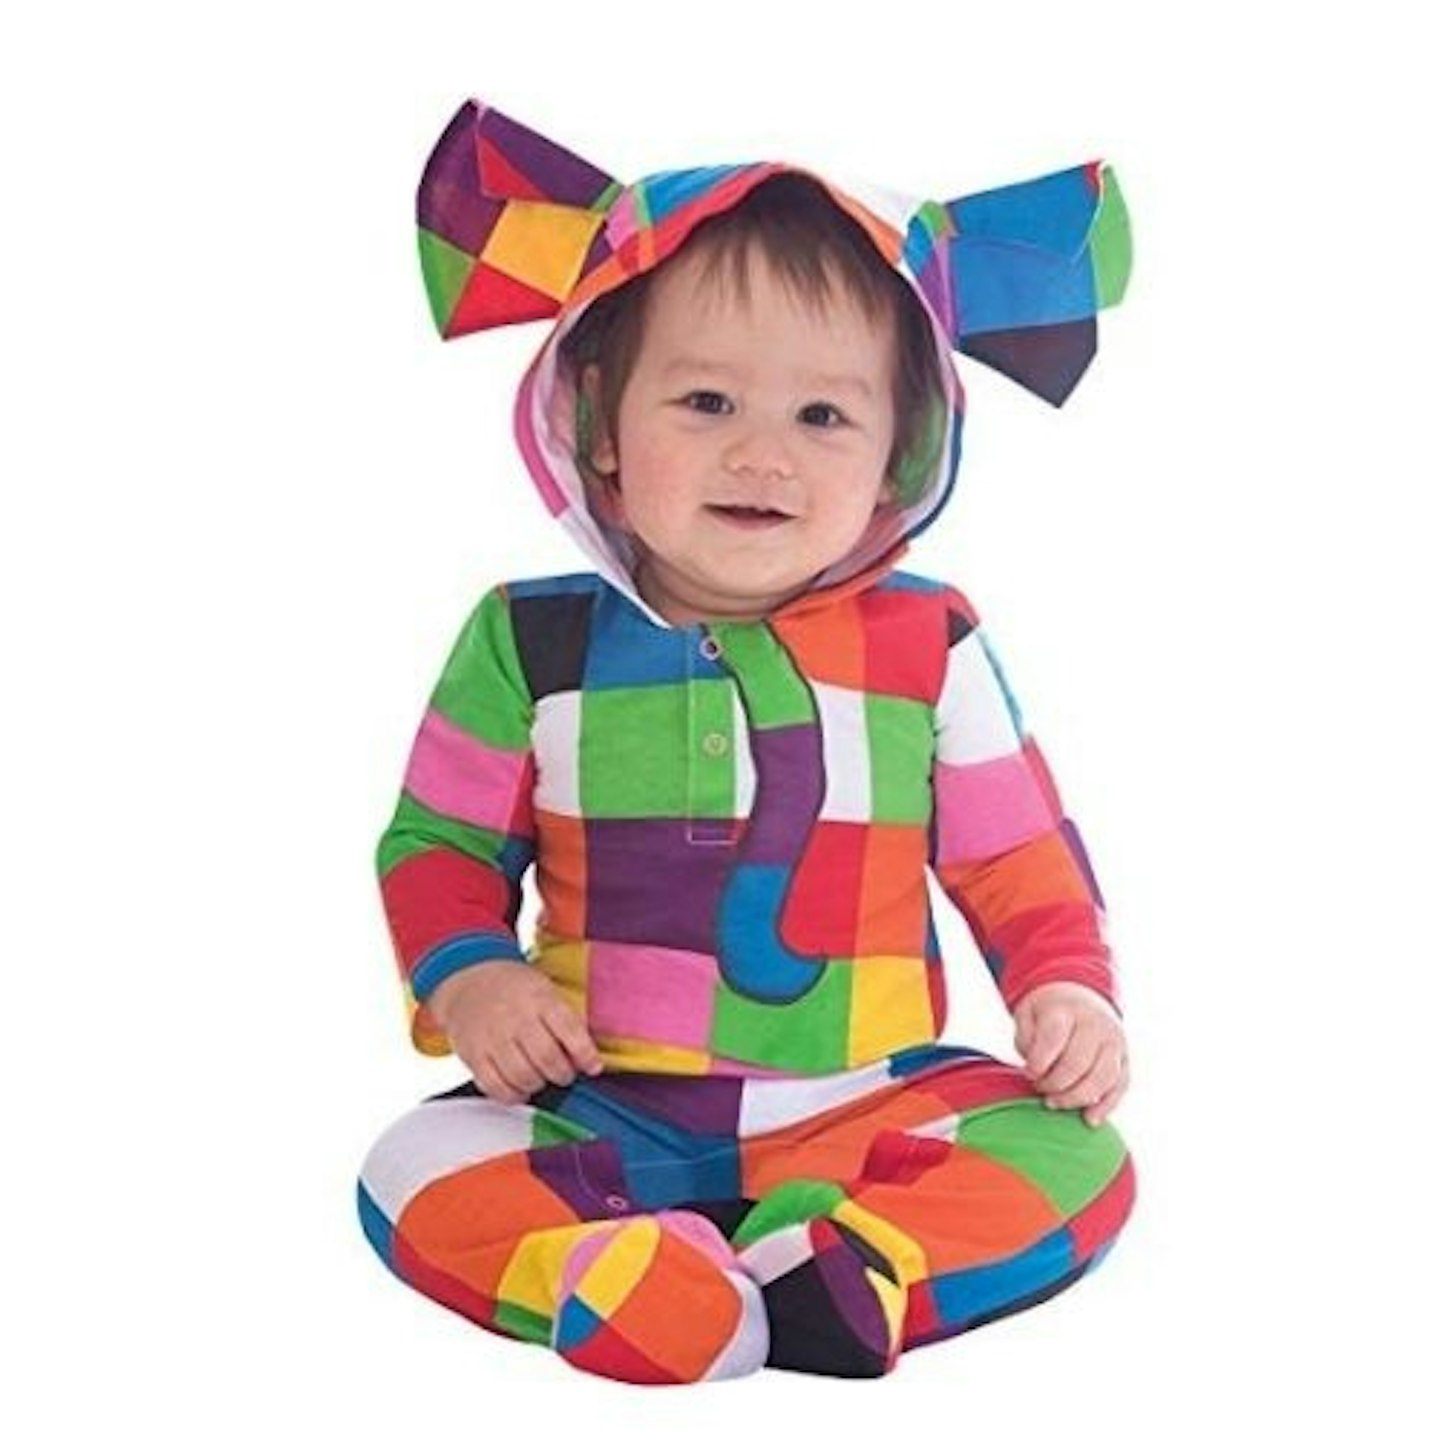 Official Elmer The Patchwork Elephant colourful fancy dress costume